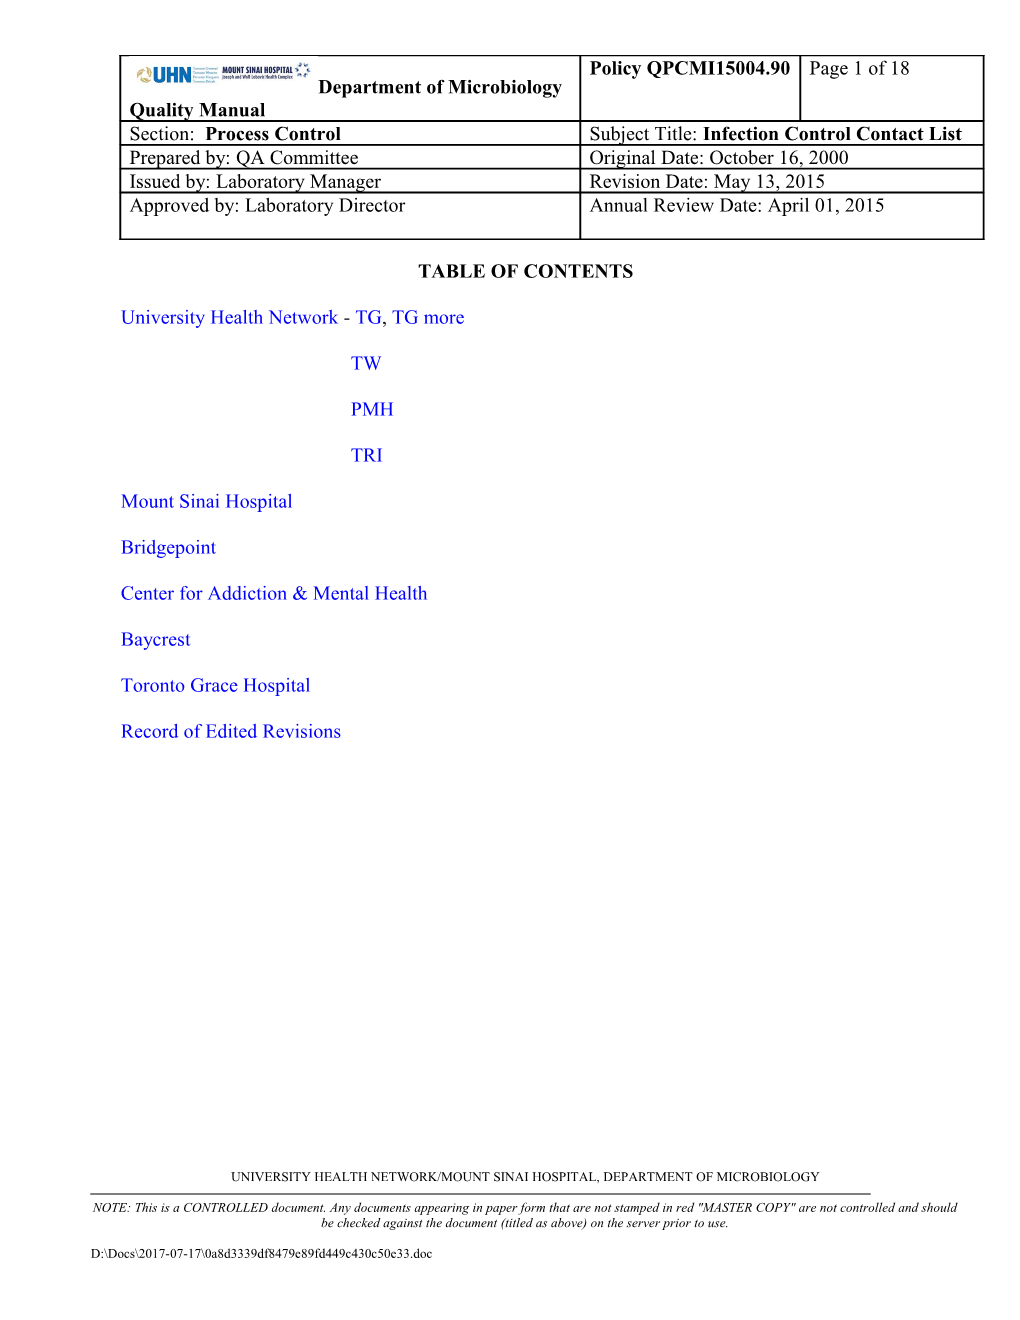 Infection Control Contact List – Uhn